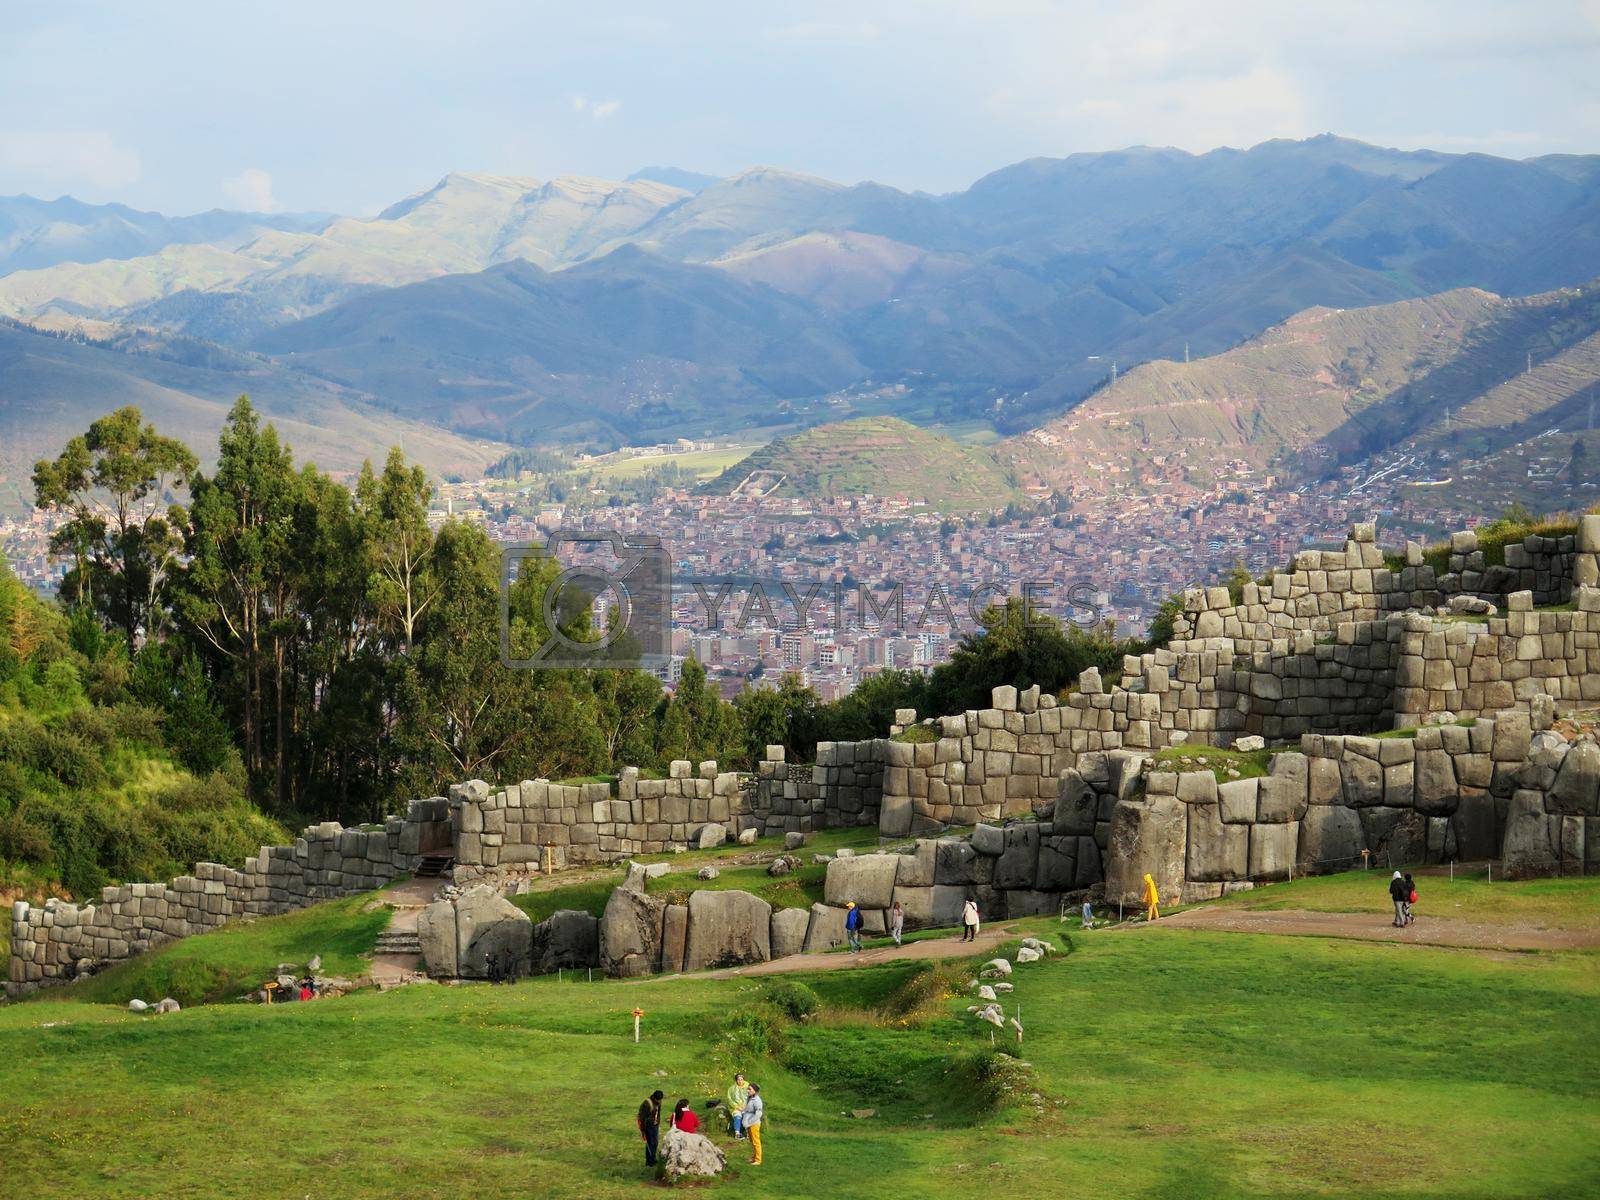 Royalty free image of Sacsayhuaman, Incas ruins in the peruvian Andes by aroas